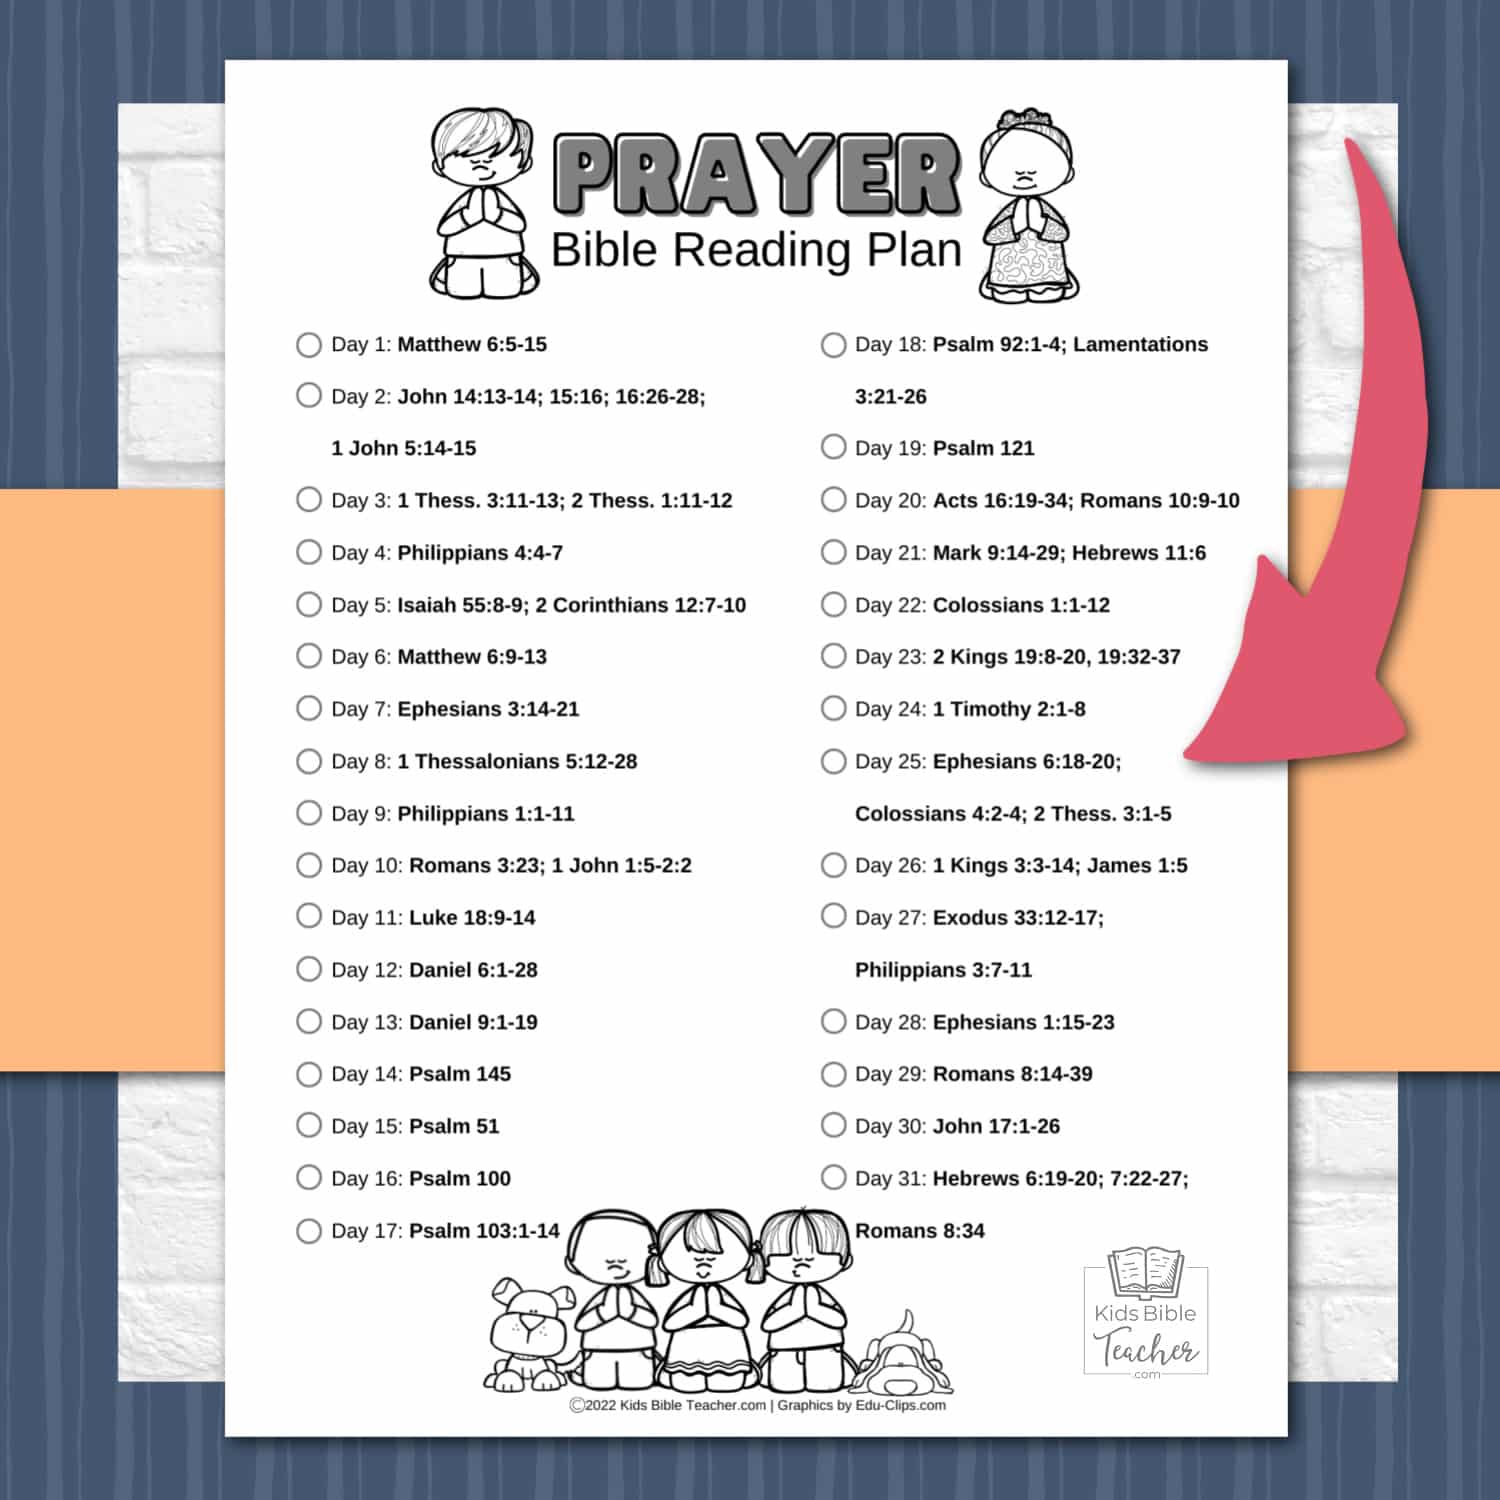 Prayer Bible Reading Plan for Kids showing printable page in black and white with Prayer Bible Verses to read and checkboxes